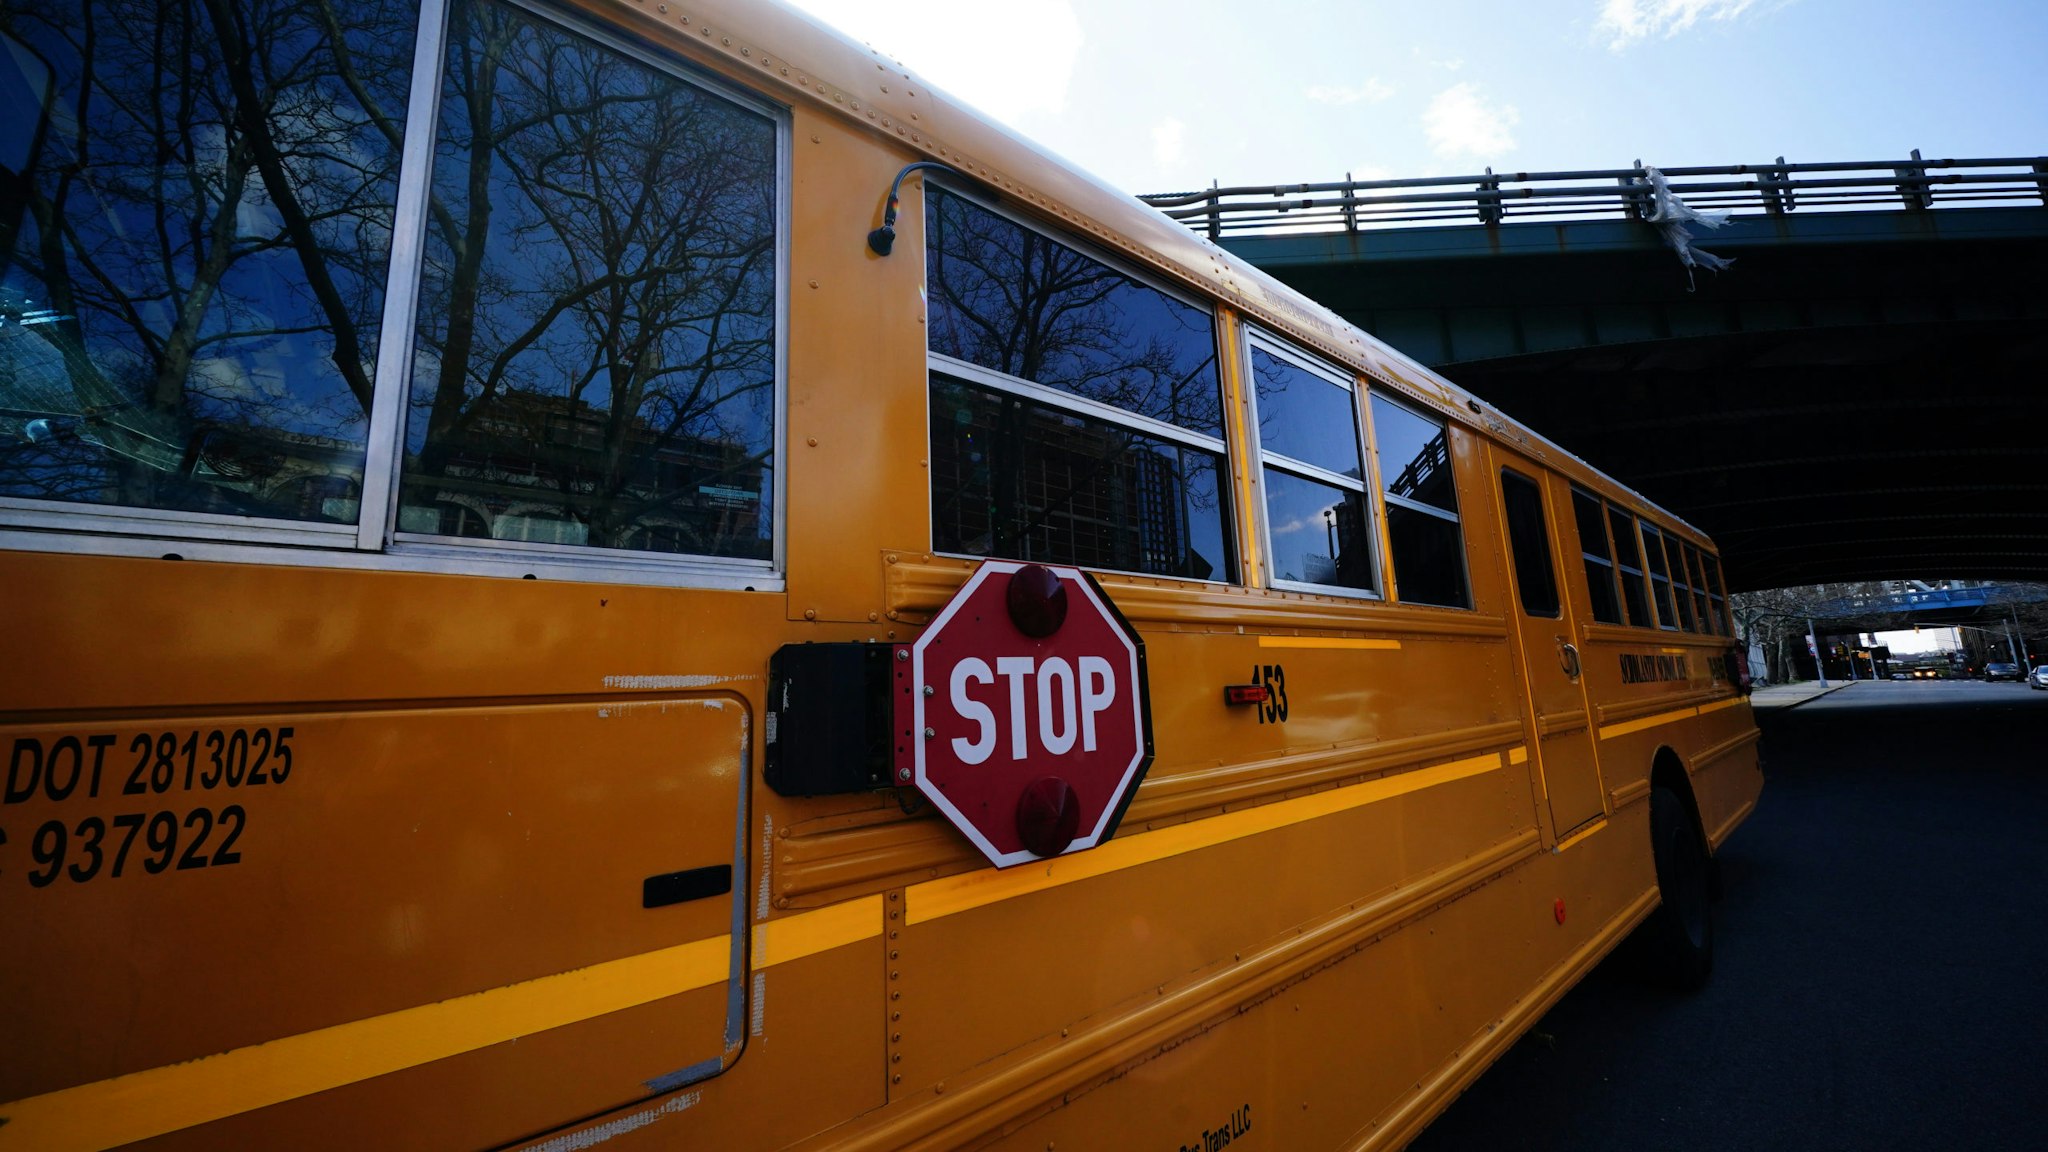 A view of a School bus in Brooklyn, New York, USA. Mayor Bill Di Blasio announces suspension of Public School Classes for the remainder of academic year during coronavirus pandemic on April 11, 2020. (Photo by John Nacion/NurPhoto via Getty Images)